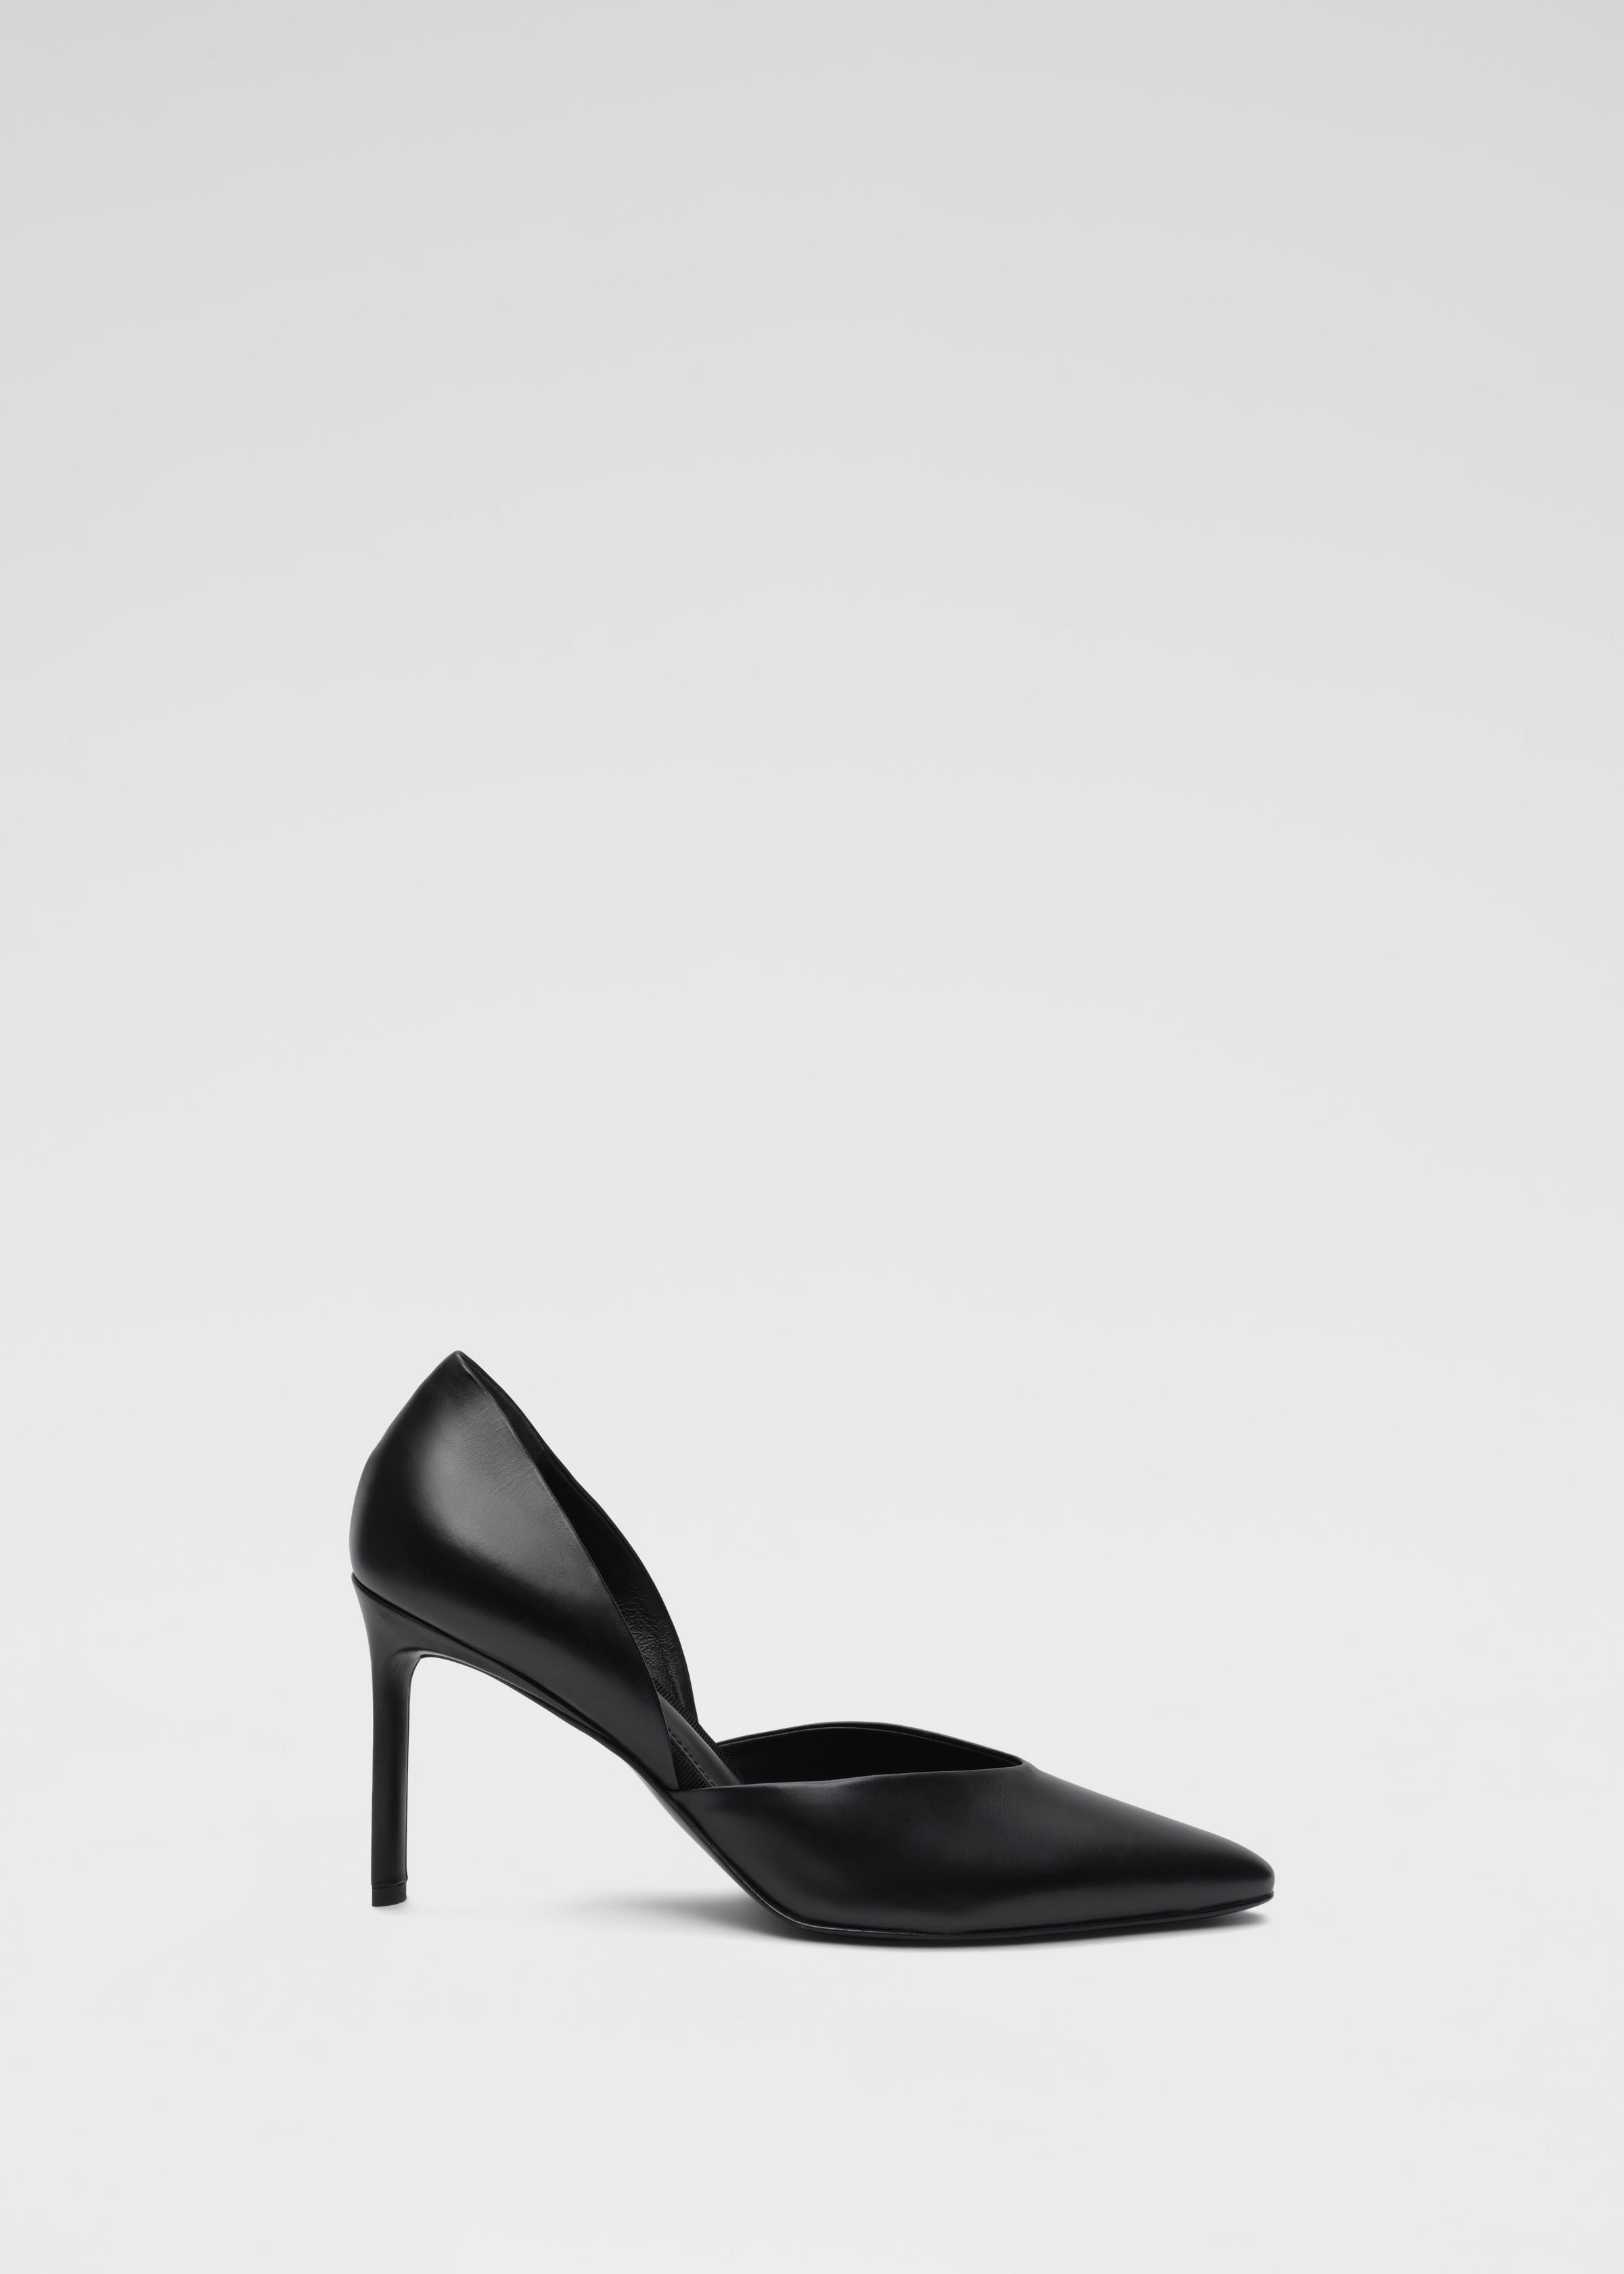 D'Orsay Stiletto Heel in Leather - Black - CO Collections